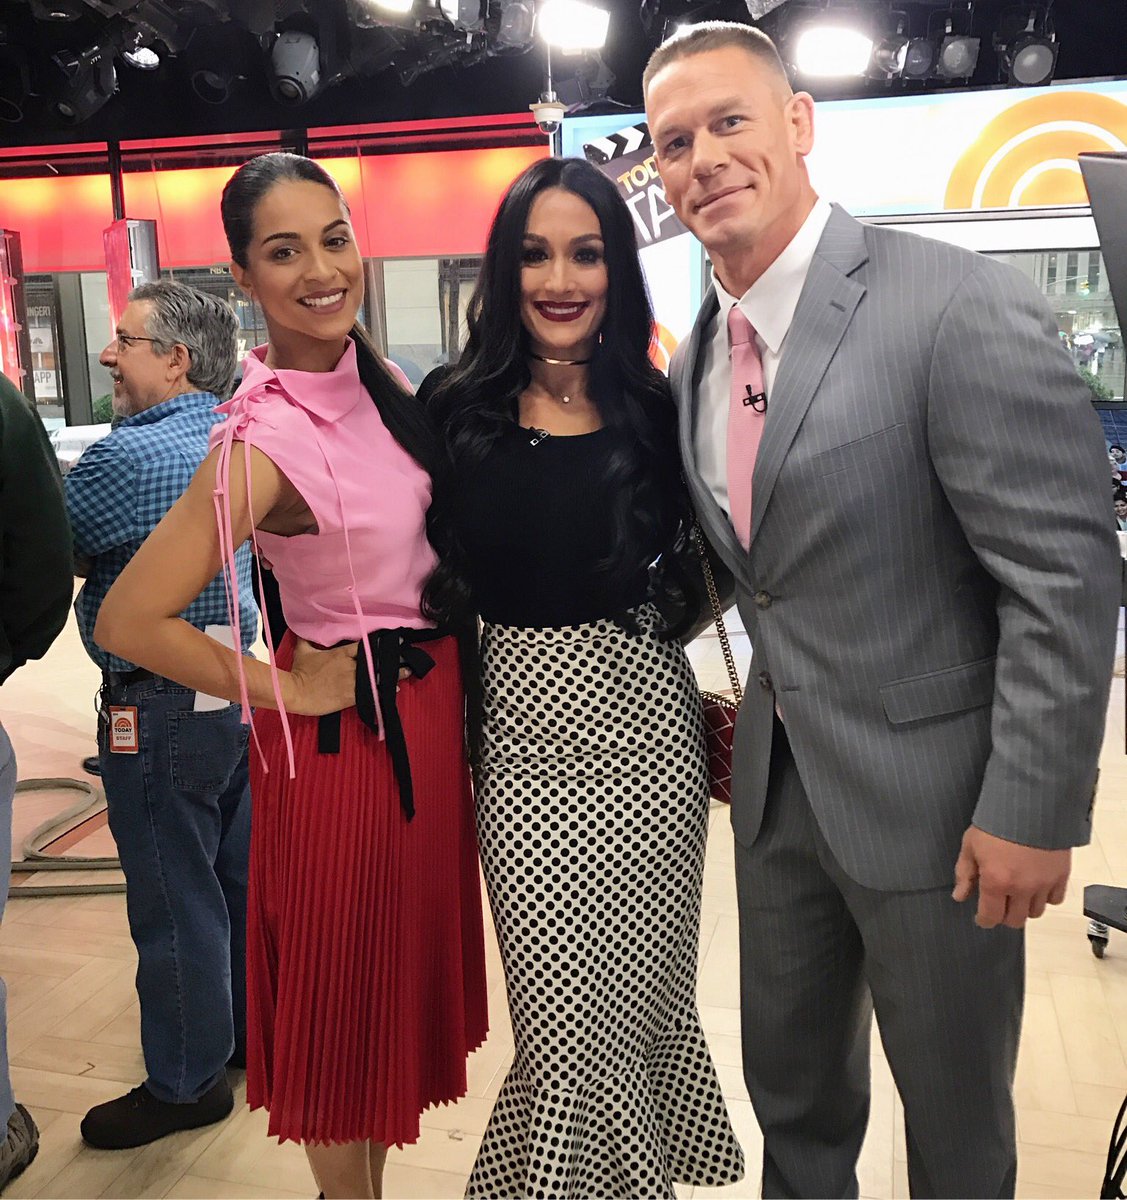 Look who I found! My boo Nikki and @JohnCena. I almost didn't see him. #DadJokes 💪🏽😂